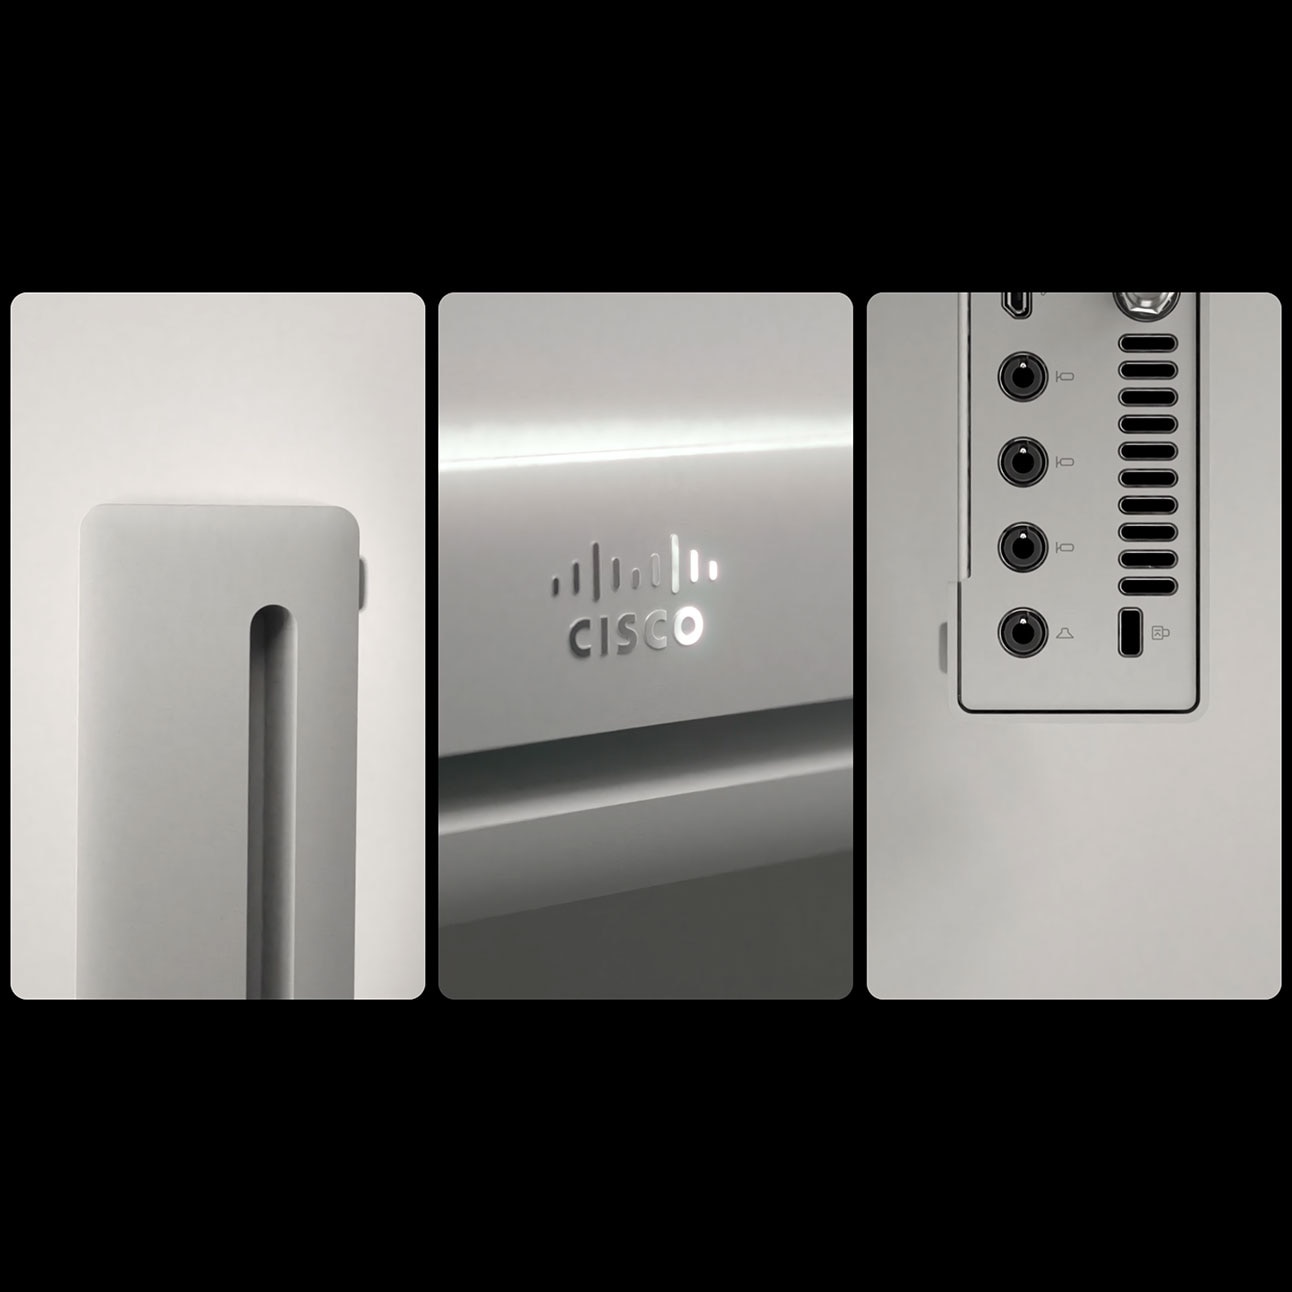 Three product detail images showing various angles of the Cisco Codec EQ including the Cisco logo and device inputs.